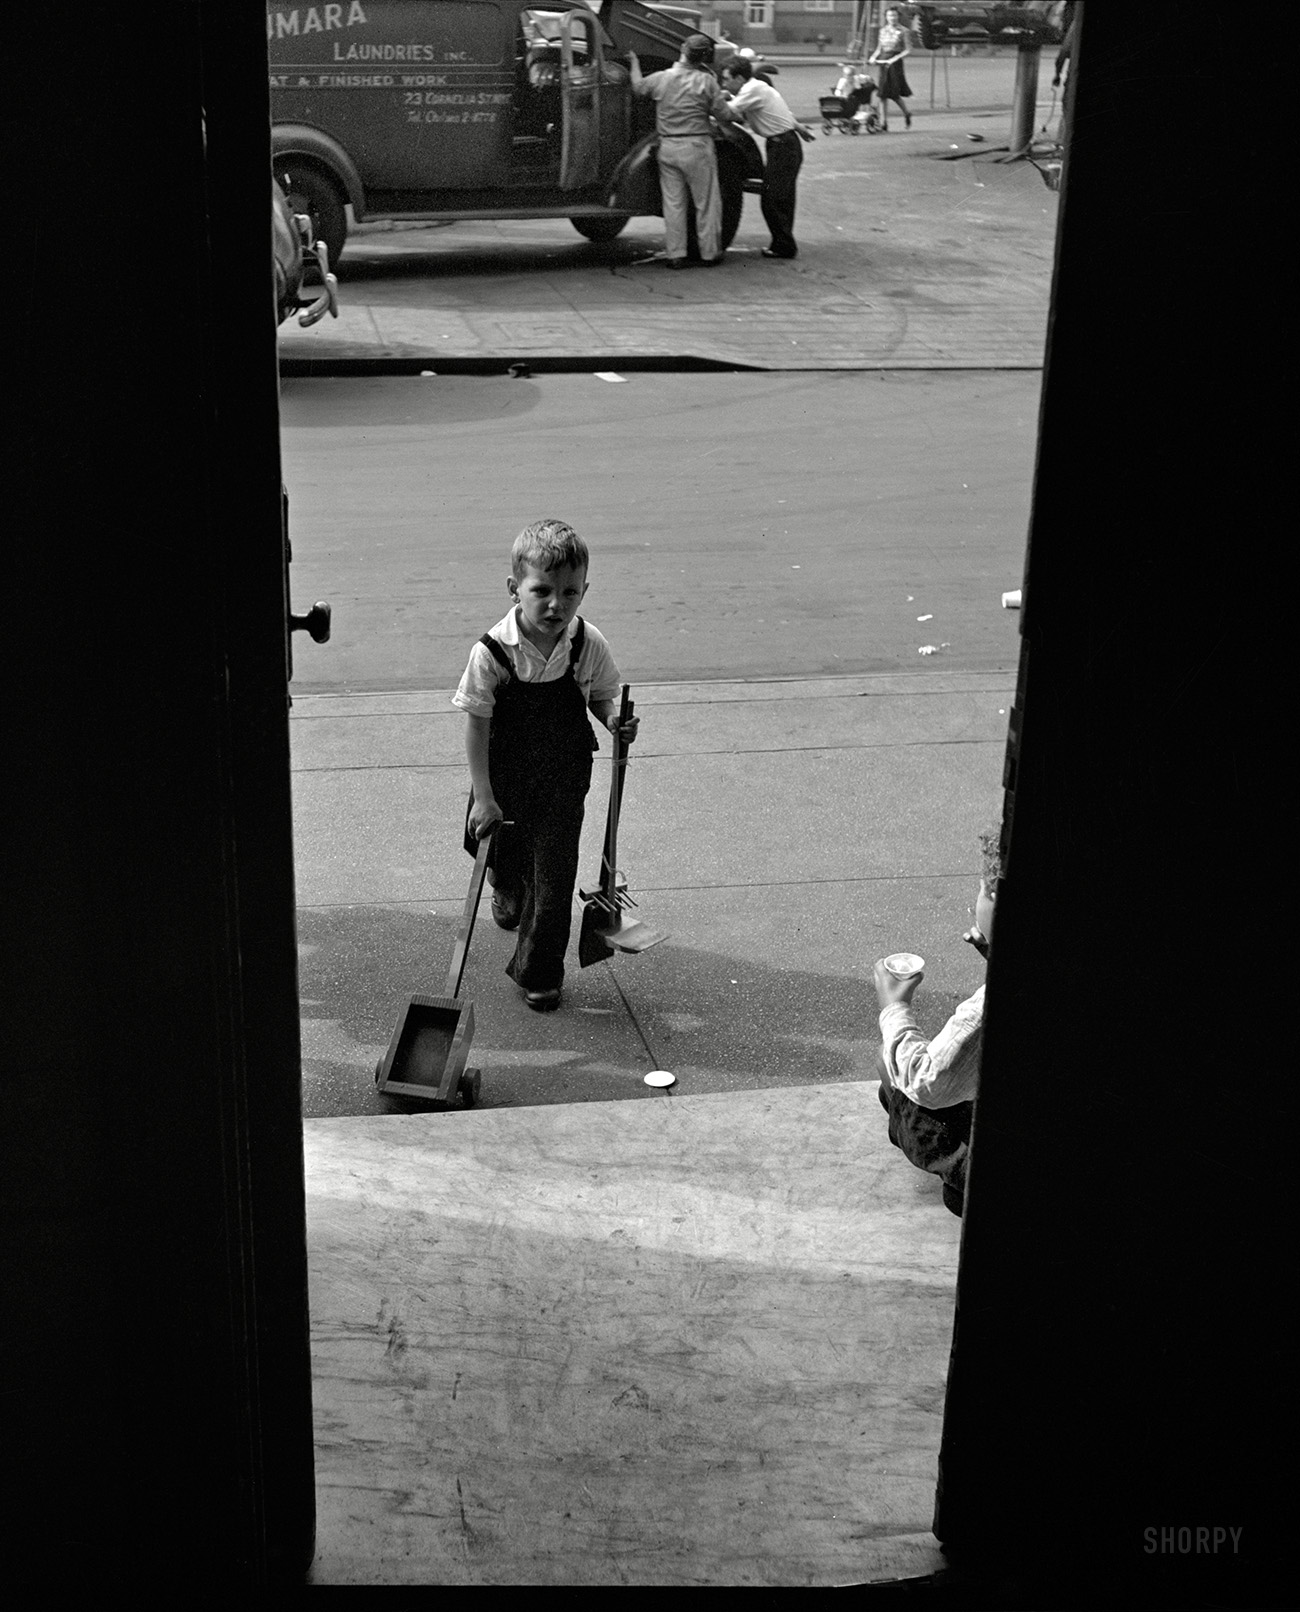 May 1944. "New York. A small boy arriving at Greenwich House, where he is enrolled in a nursery school program, receives day care while his mother works." Another perspective on the door glimpsed earlier here. Photo by the wonderfully named Risdon Tillery for the Office of War Information. View full size.